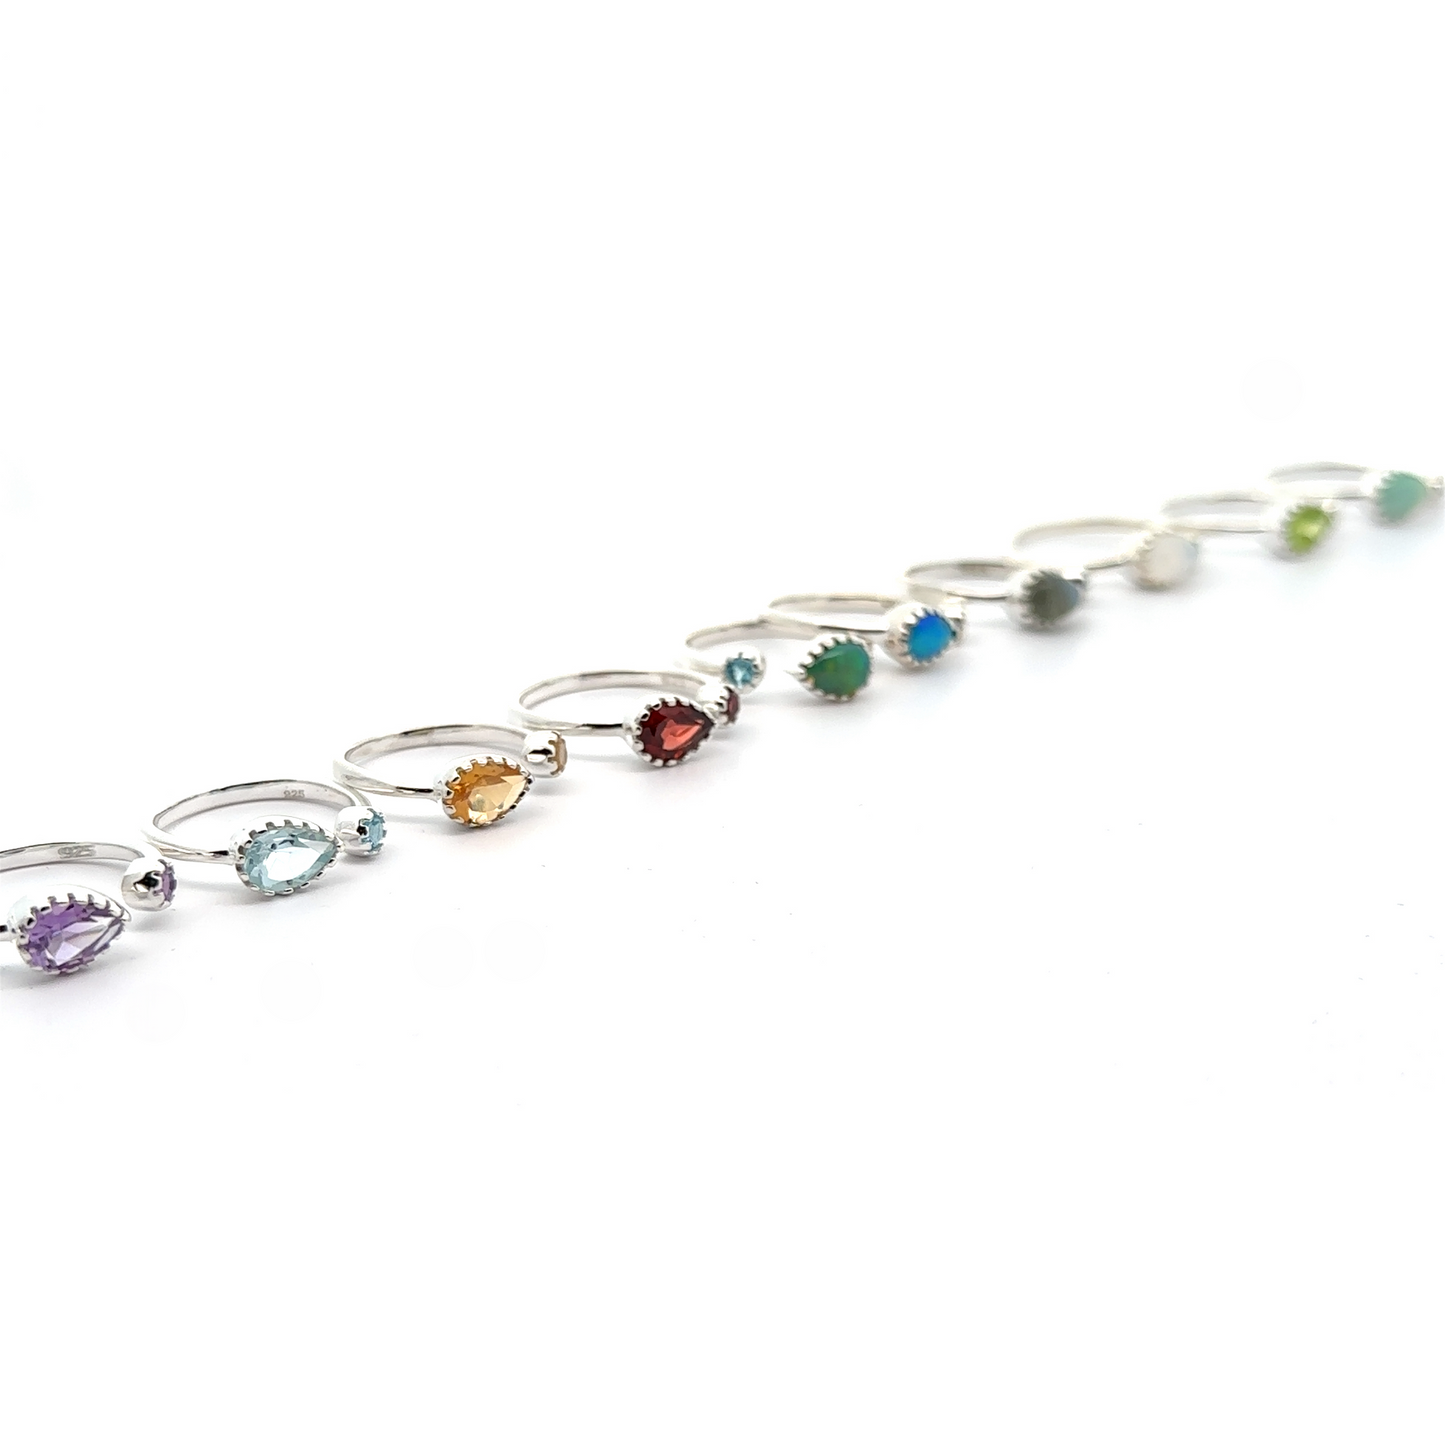 A series of Dainty Adjustable Gemstone Rings with Two Stones arranged in a curve on a white background.